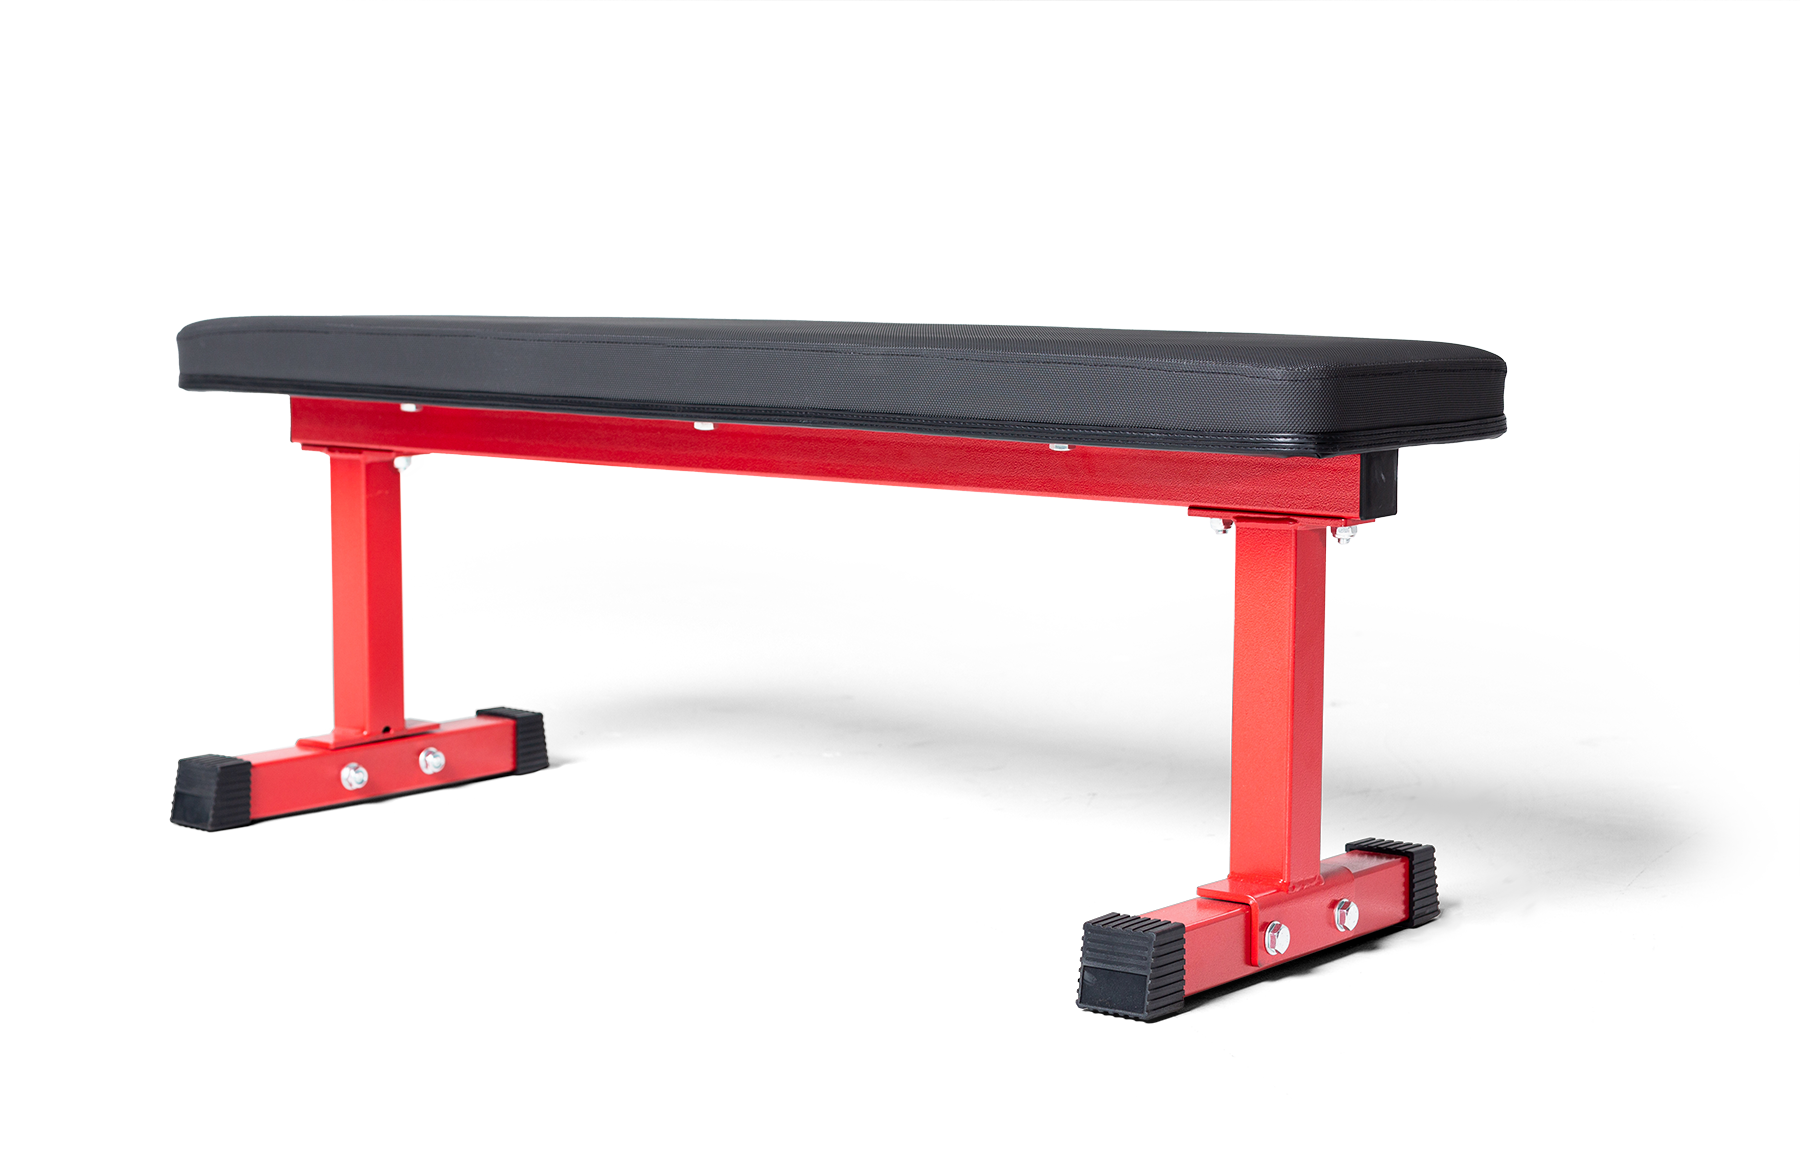 Rep Fitness Flat Bench